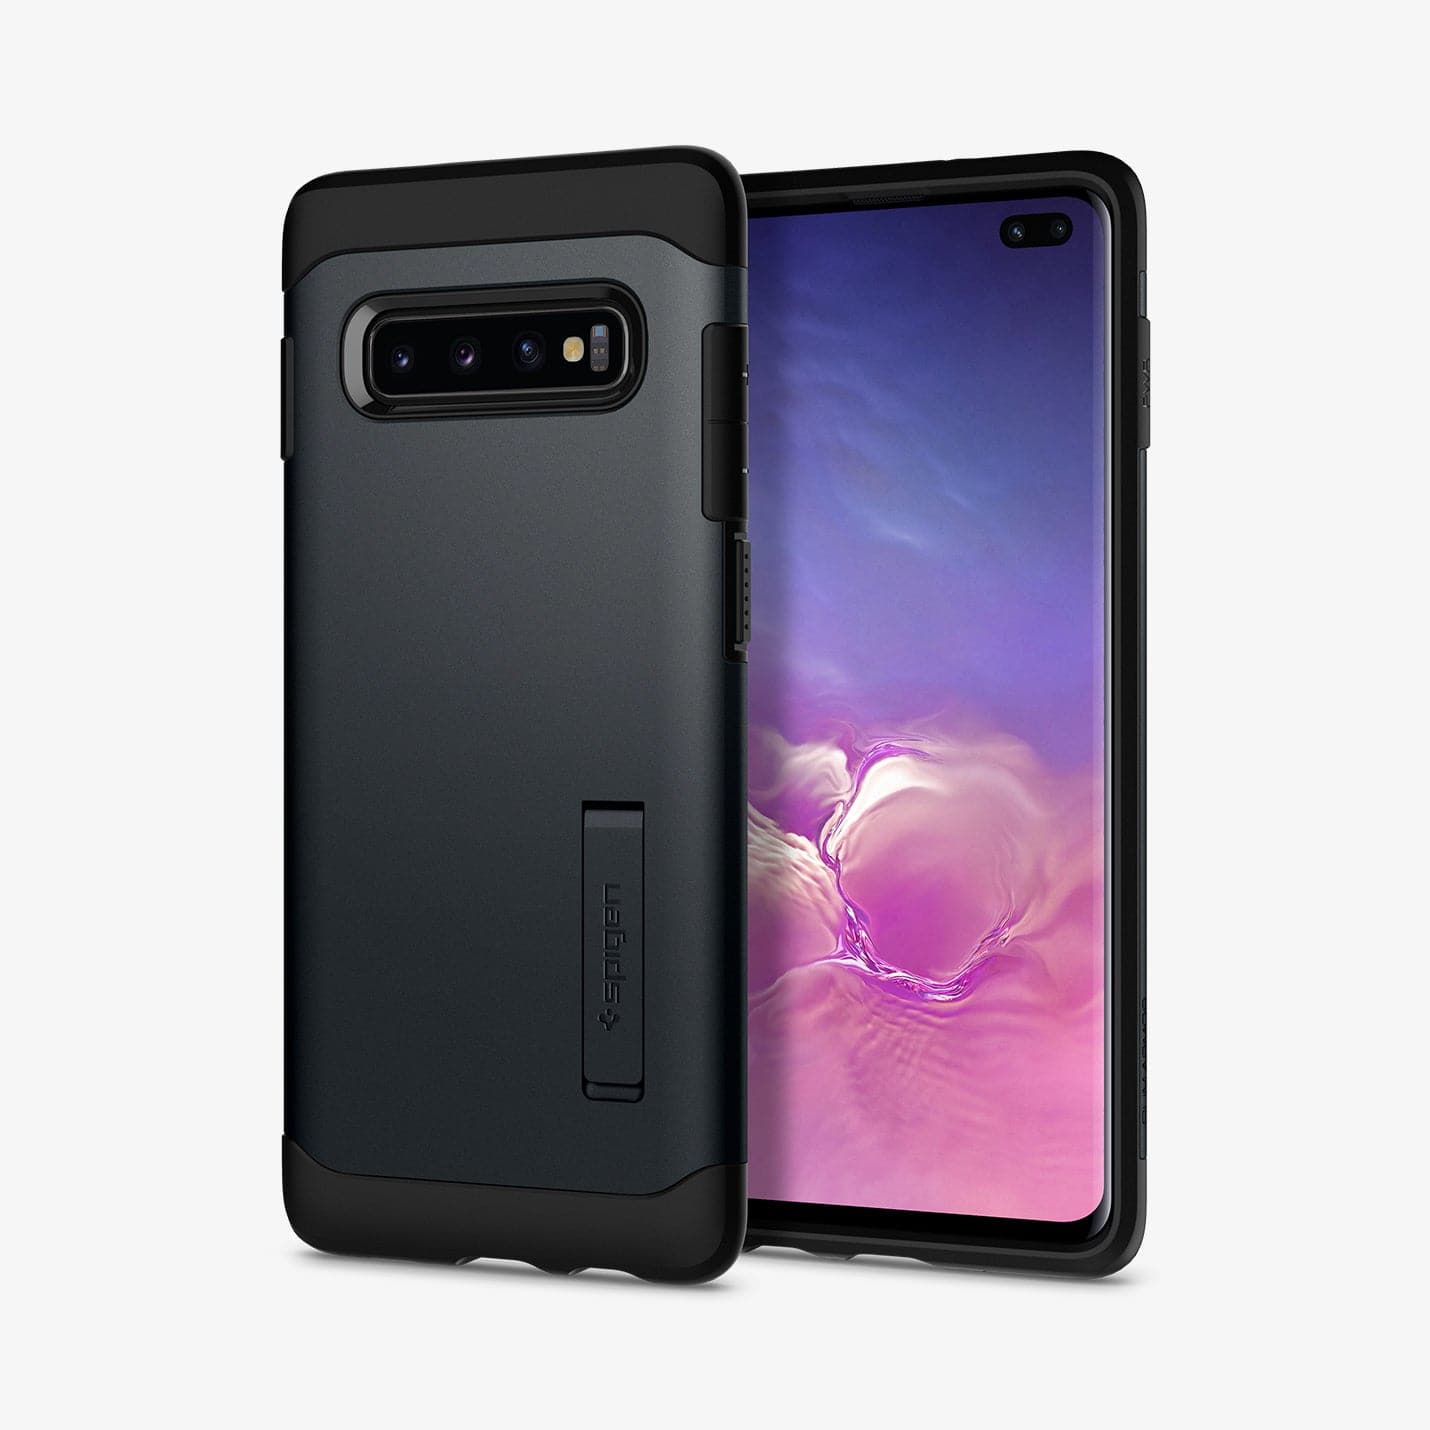 606CS25391 - Galaxy S10 Series Slim Armor Case in metal slate showing the back and front